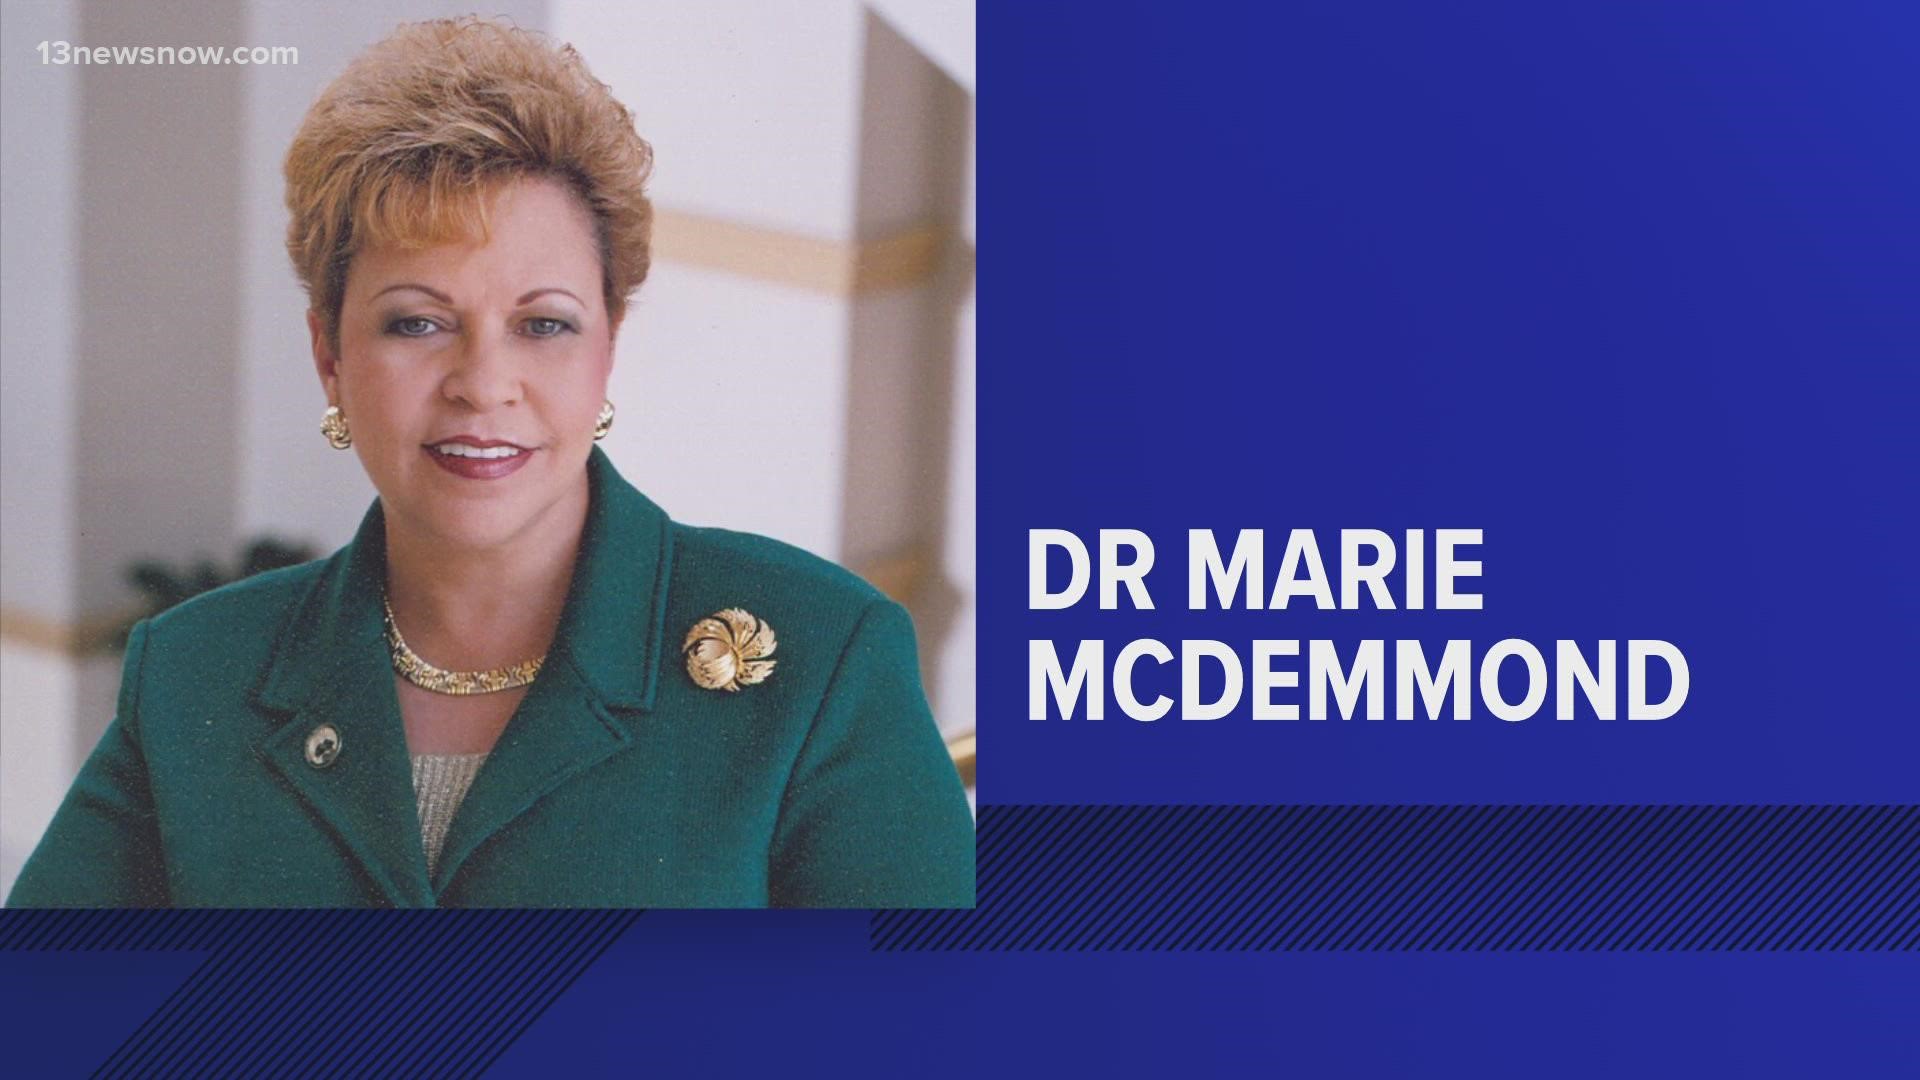 Dr. McDemmond made history as the first woman to lead NSU and as the first African American woman to lead a four-year higher education institution in Virginia.